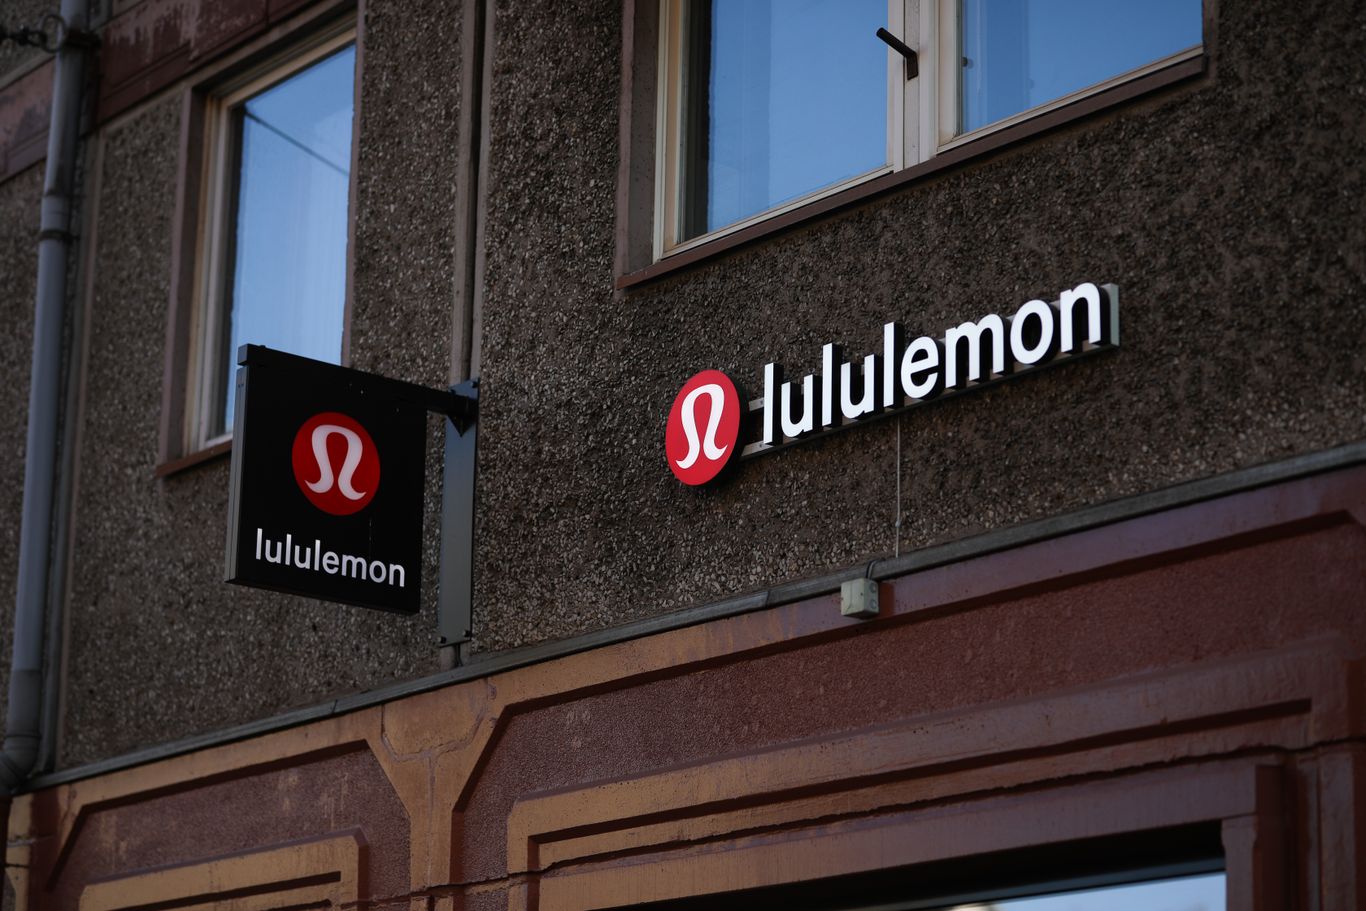 Lululemon replaces Hudson's Bay Company as official clothier of